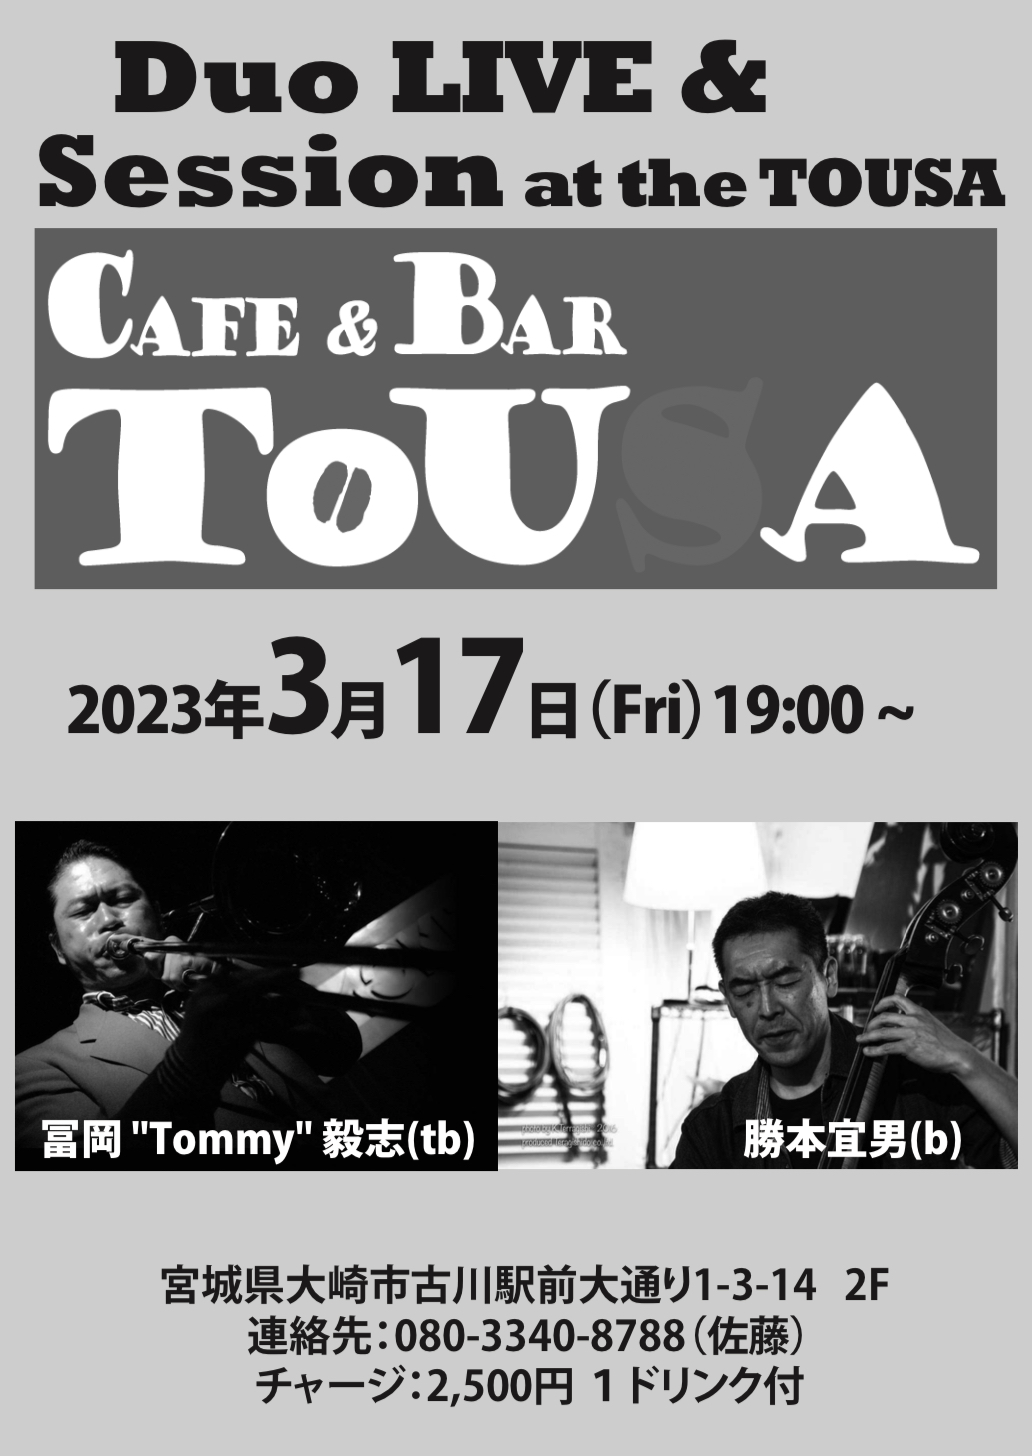 Duo LIVE & Session at the TOUSA